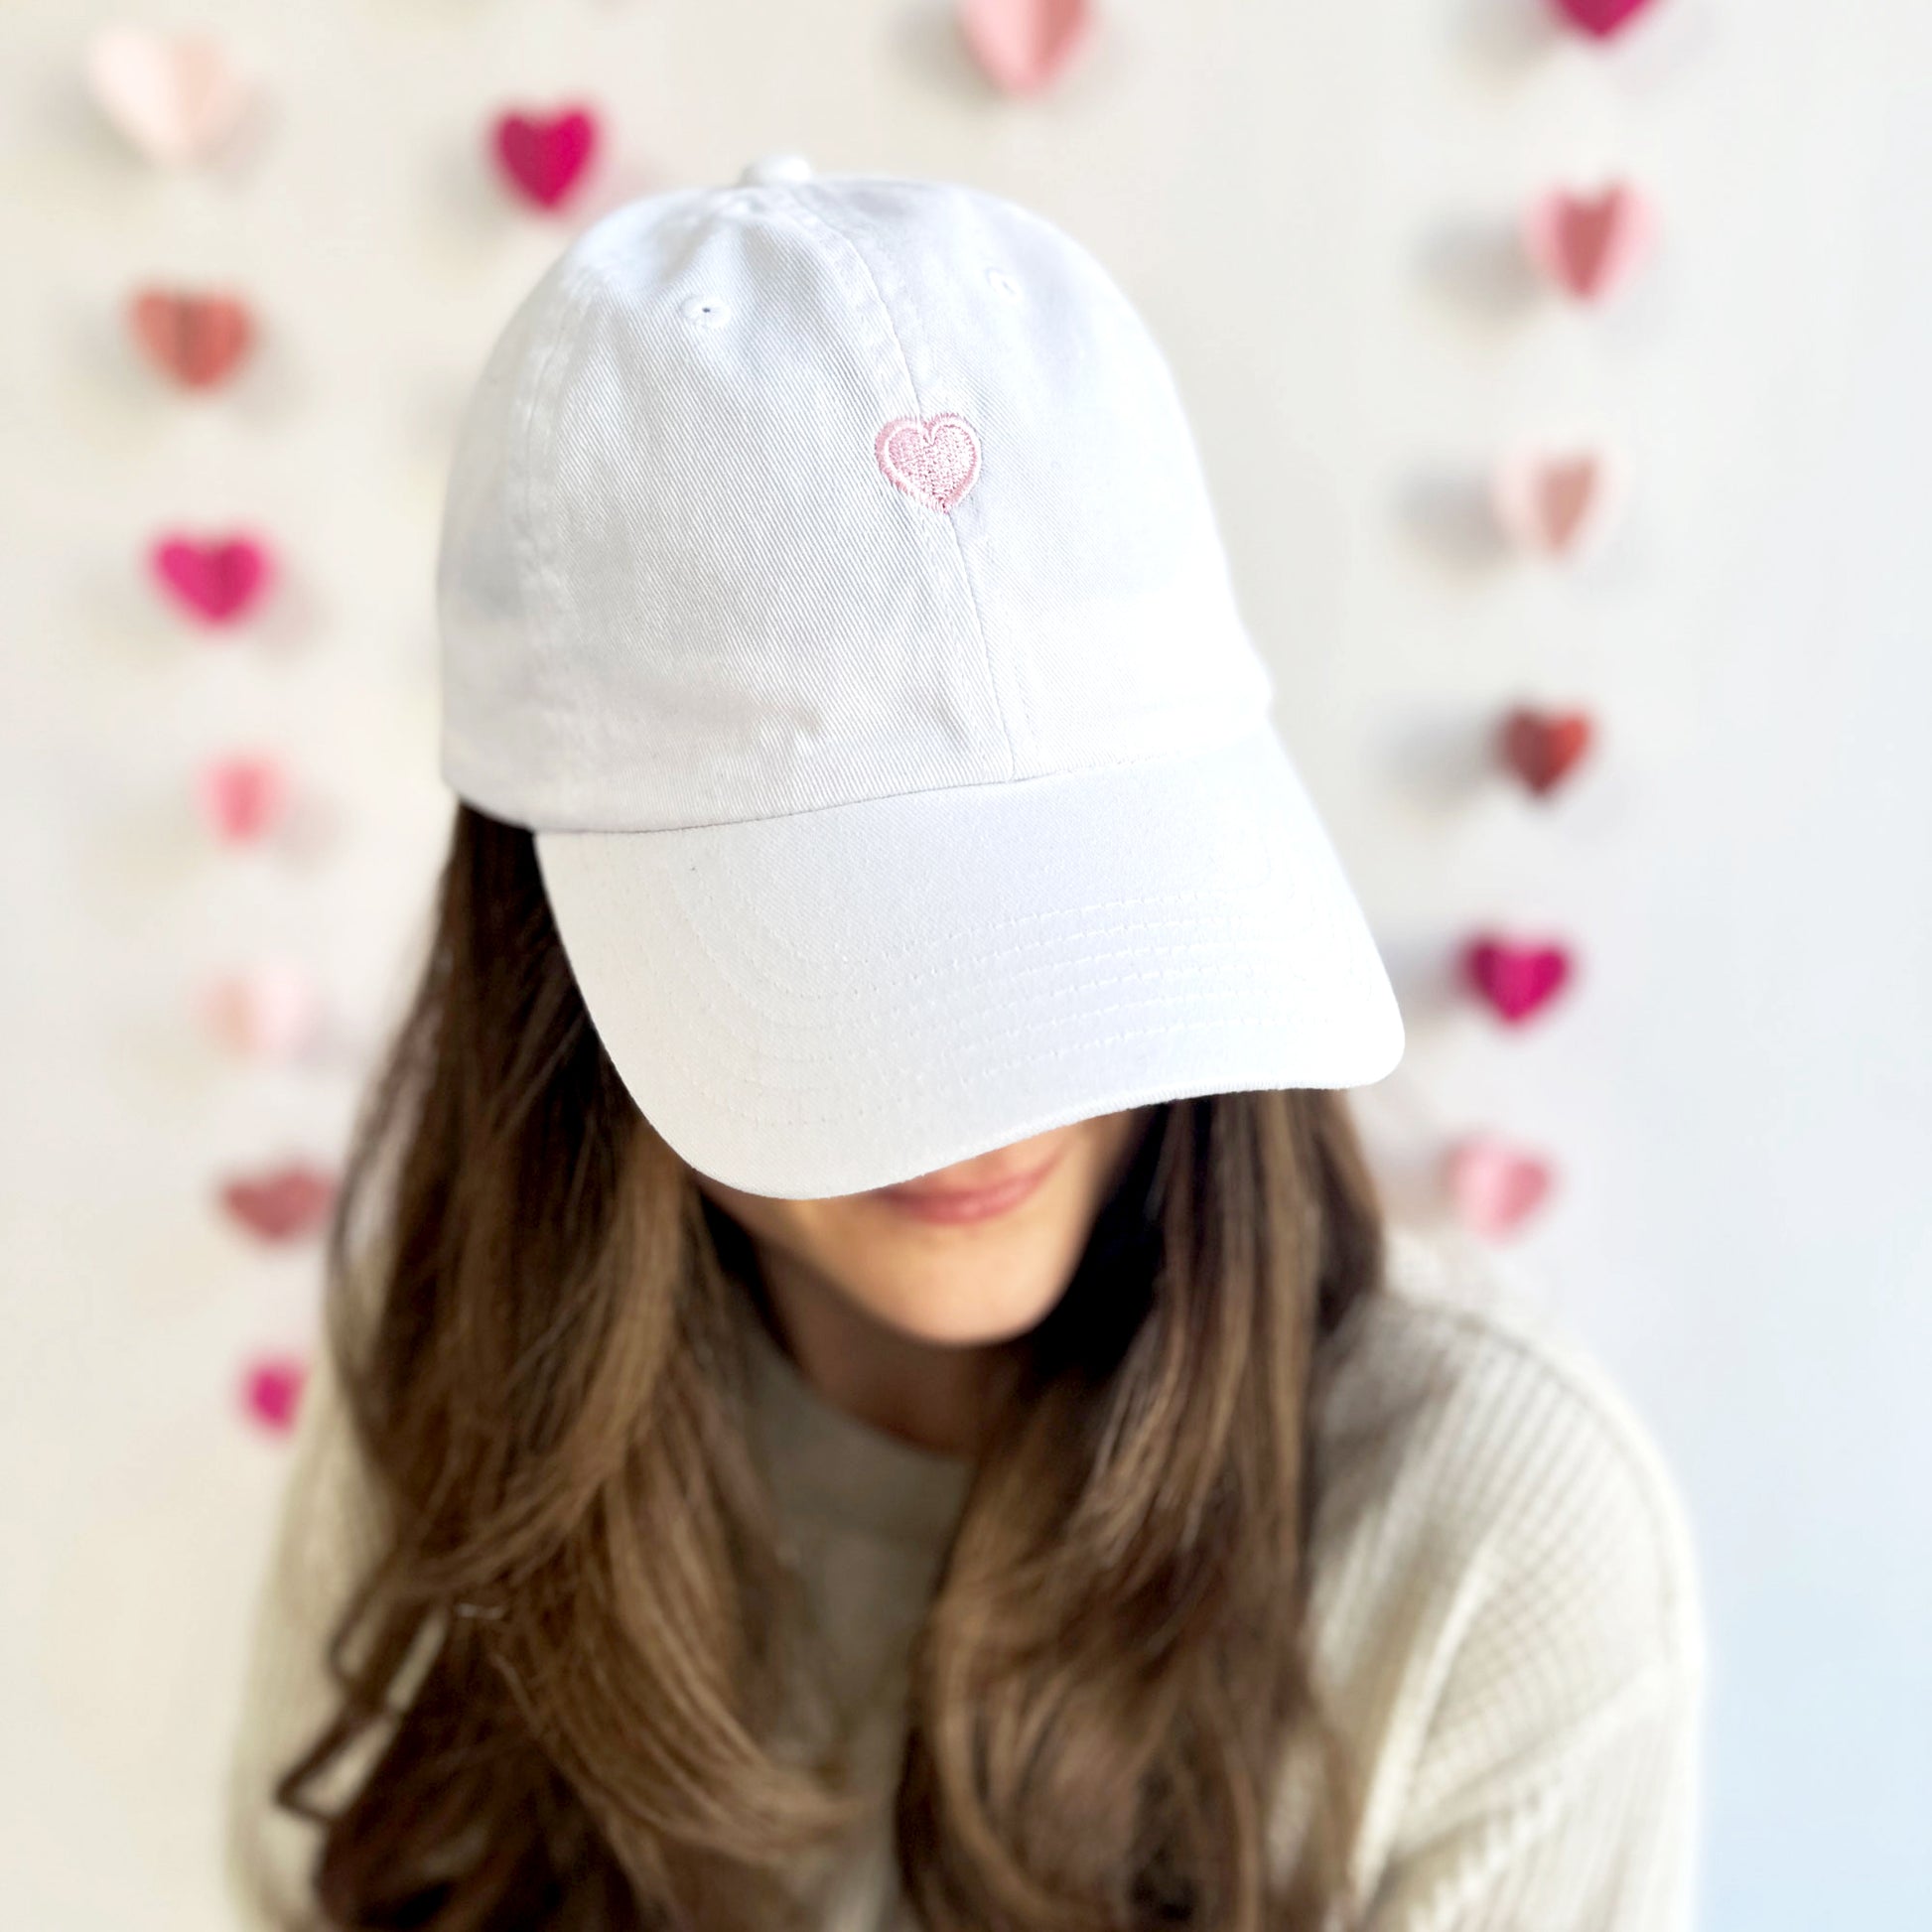 young woman wearing a white baseball cap with baby pink embroidered heart